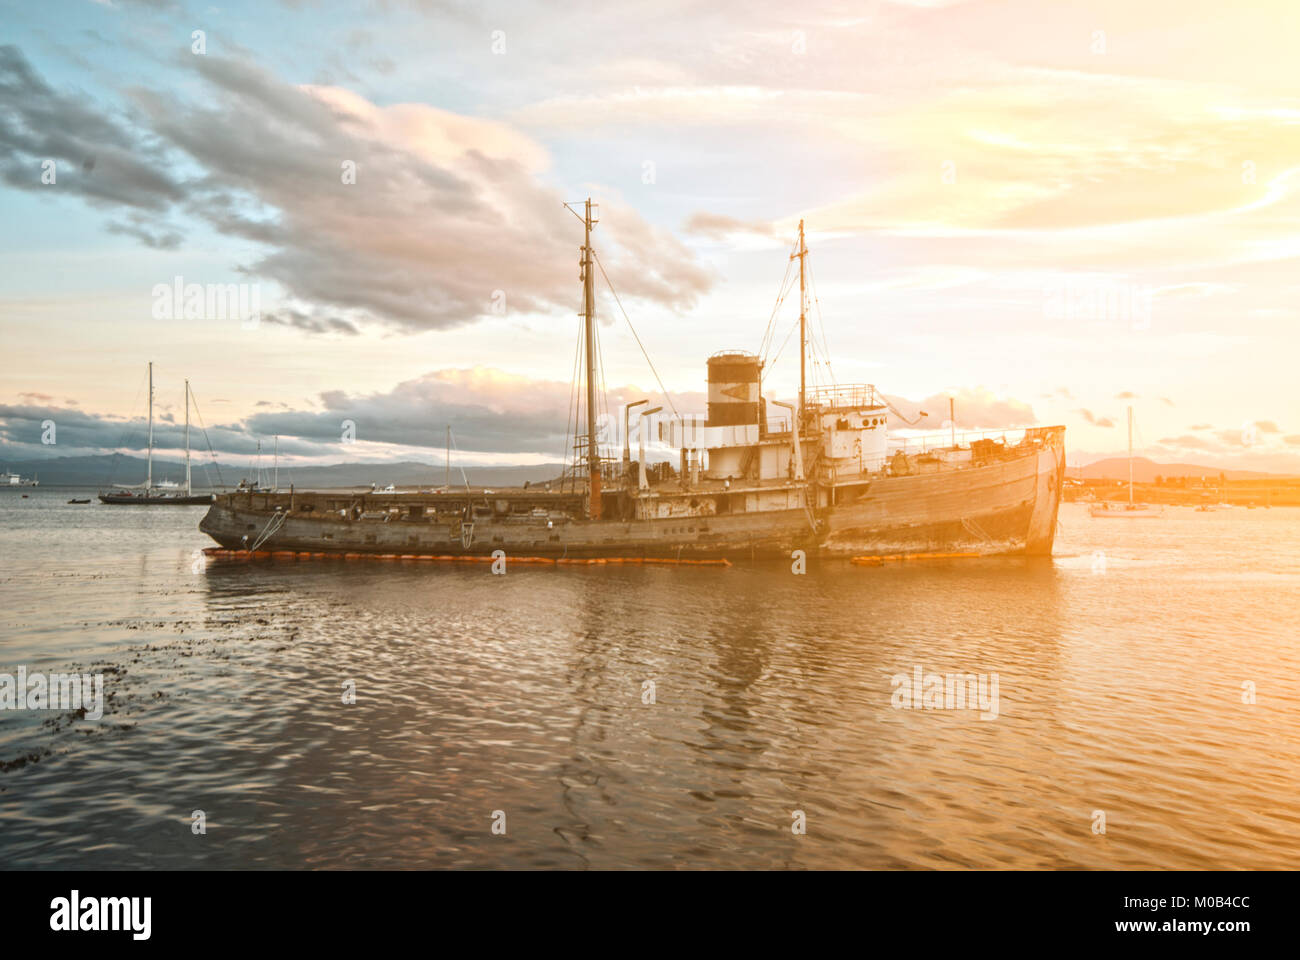 Shipwreck in the Ushuaia harbor with a dramatic sky in the background, Ushuaia Tierra del Fuego Argentina Stock Photo